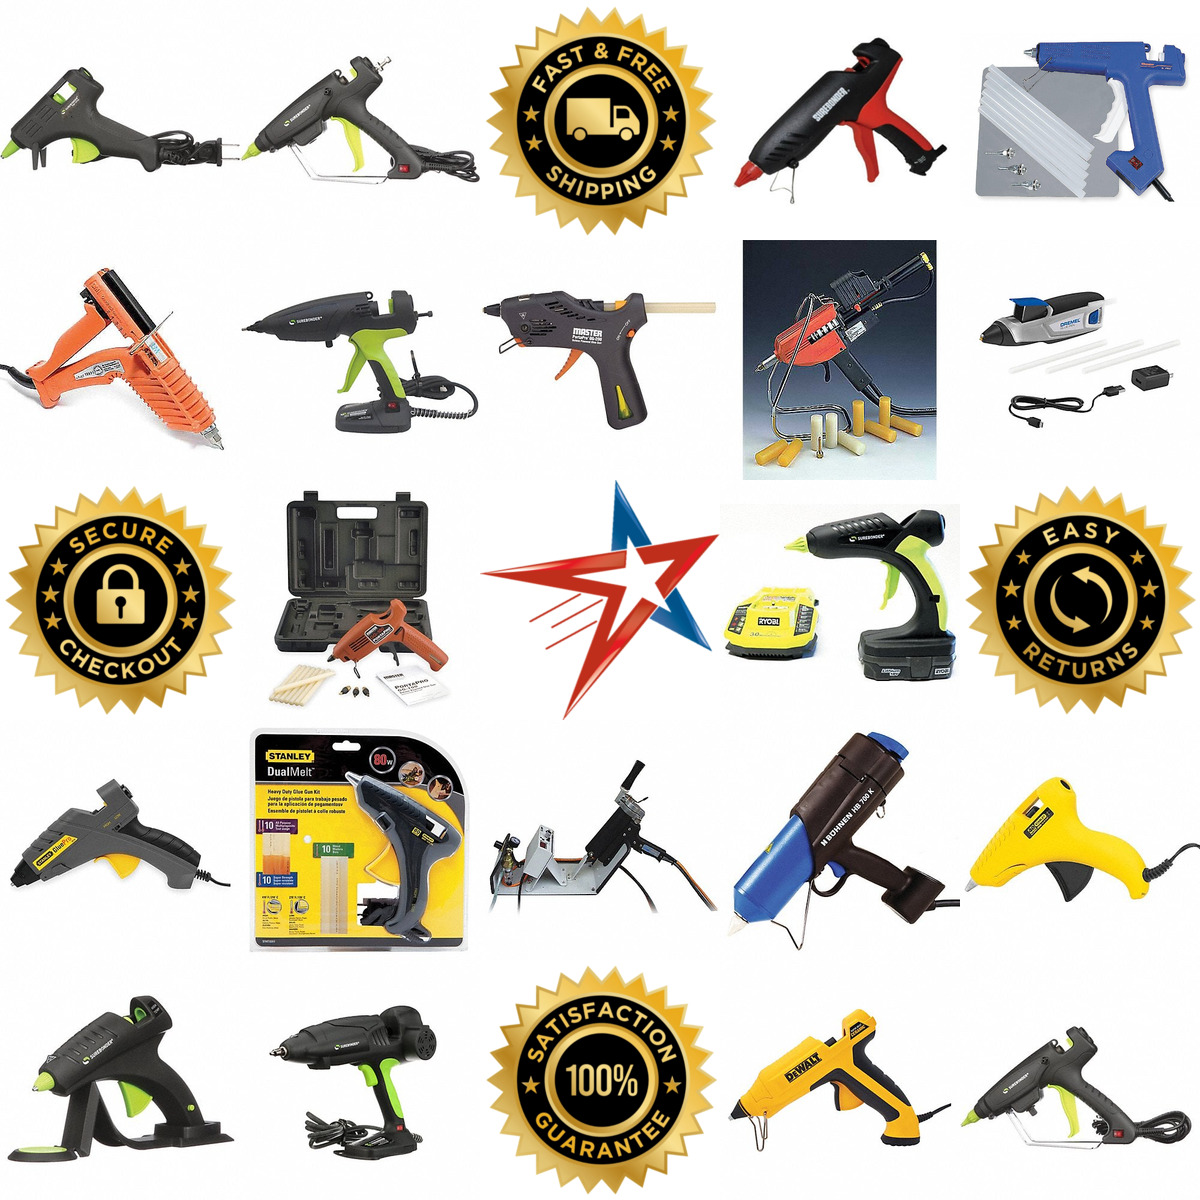 A selection of Hot Melt Glue Guns products on GoVets